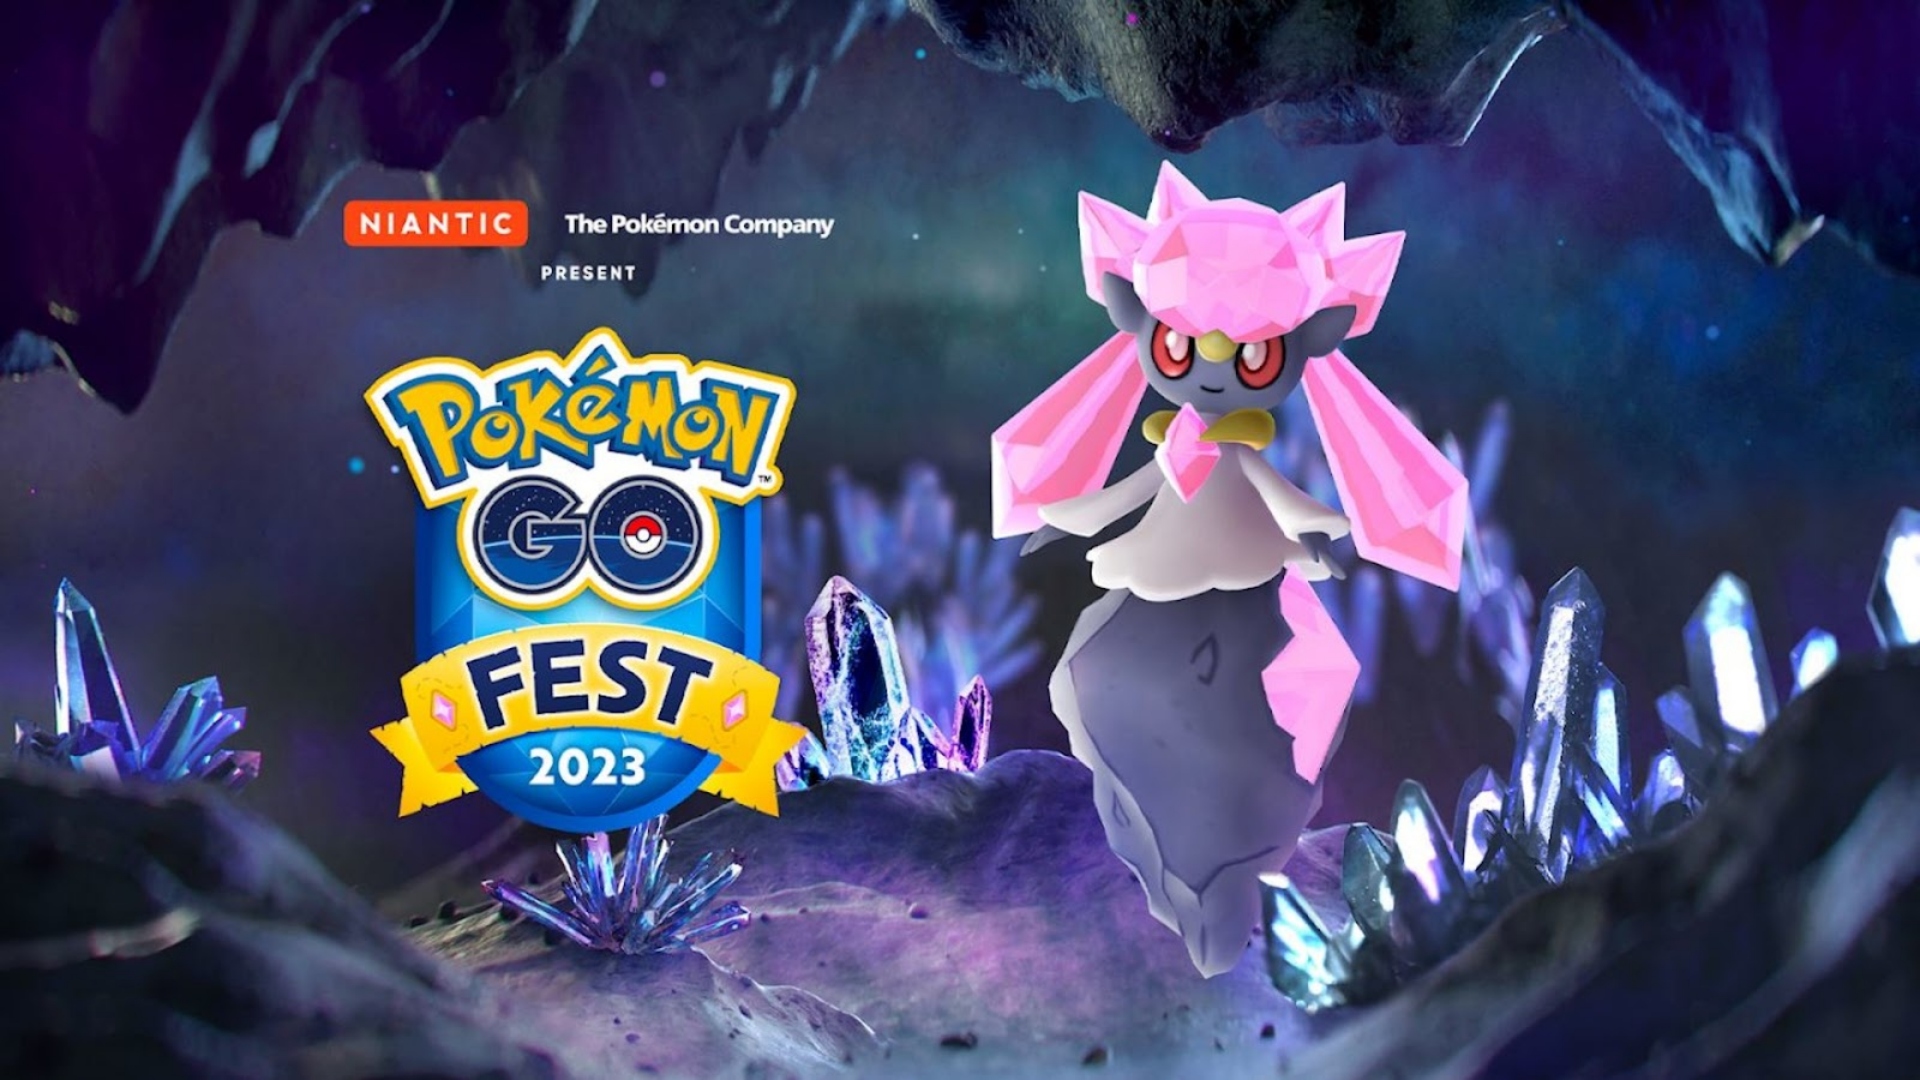 The Pokemon GO Fest 2023 promo cover with Diancie